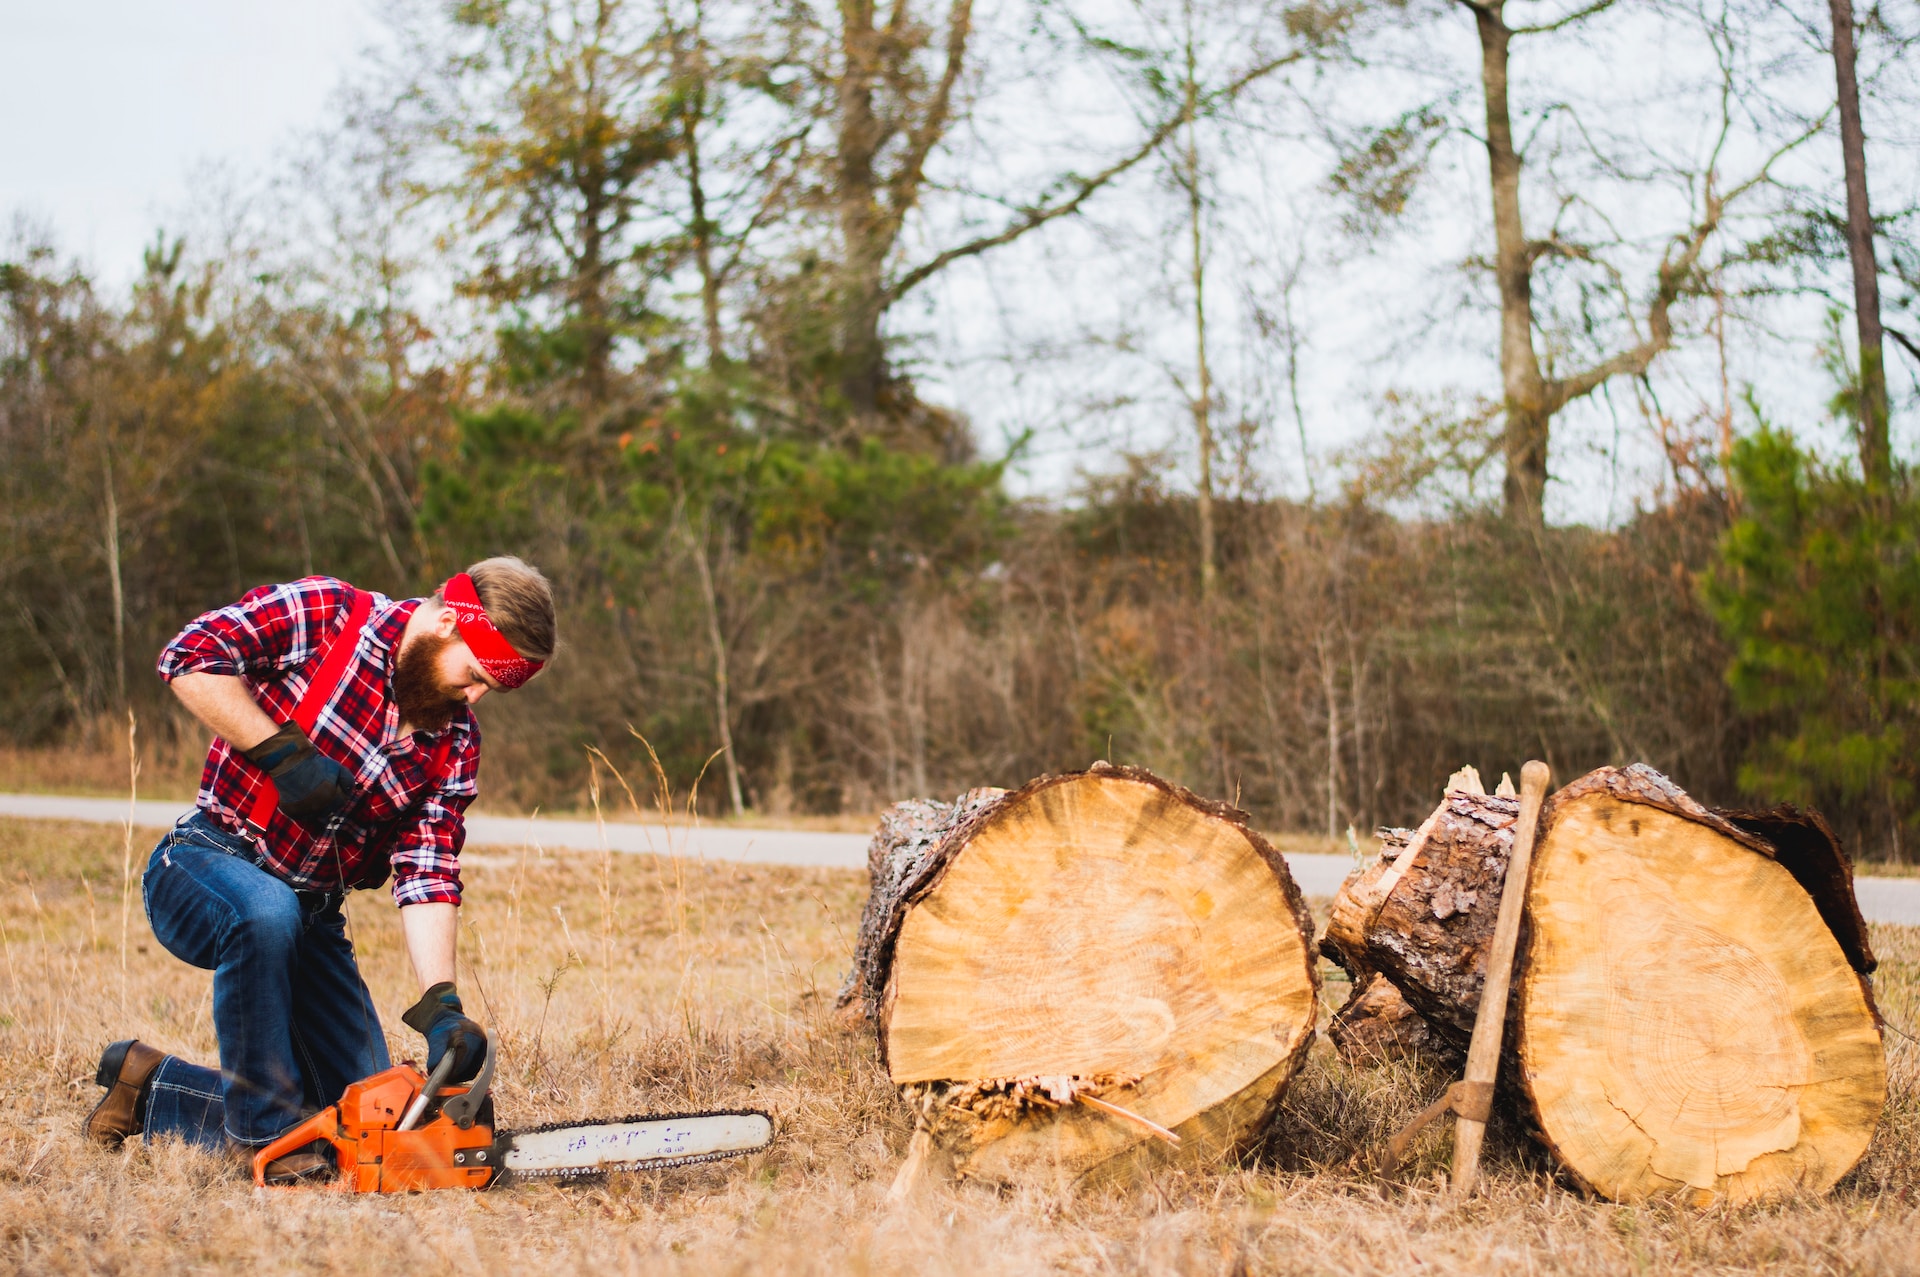 Petrol vs Electric Chainsaws: Which Should You Buy? – GYC